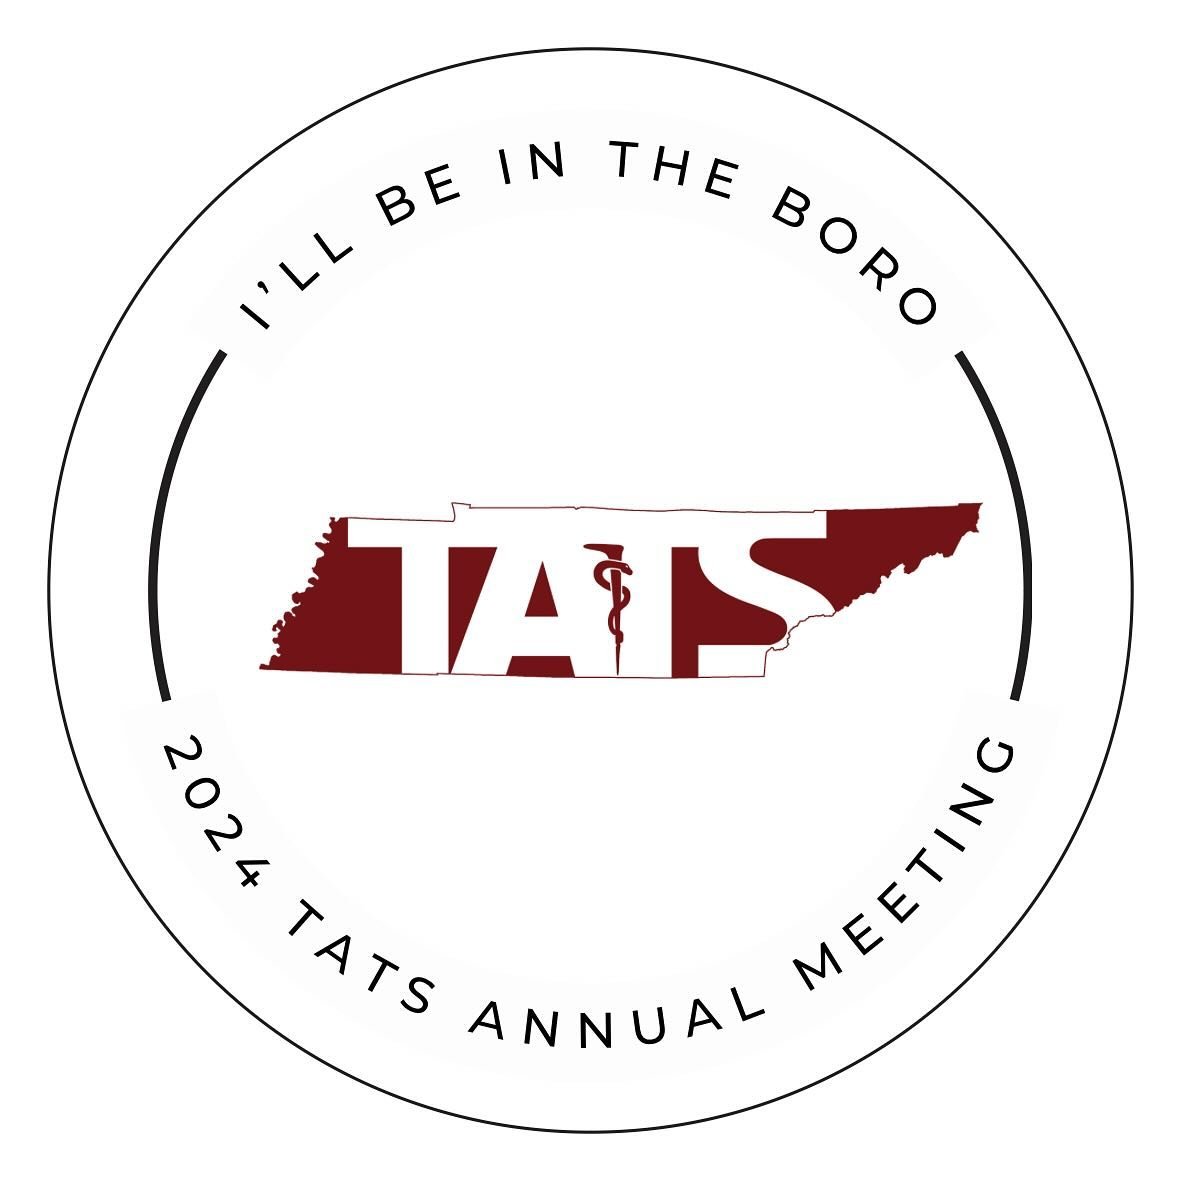 Copy and post to your page if you&rsquo;re going!!!

Be a part of the 2024 Tennessee Athletic Trainers Society Annual Meeting in Murfreesboro, TN and connect with me and other professionals in the field
Registration Link in bio